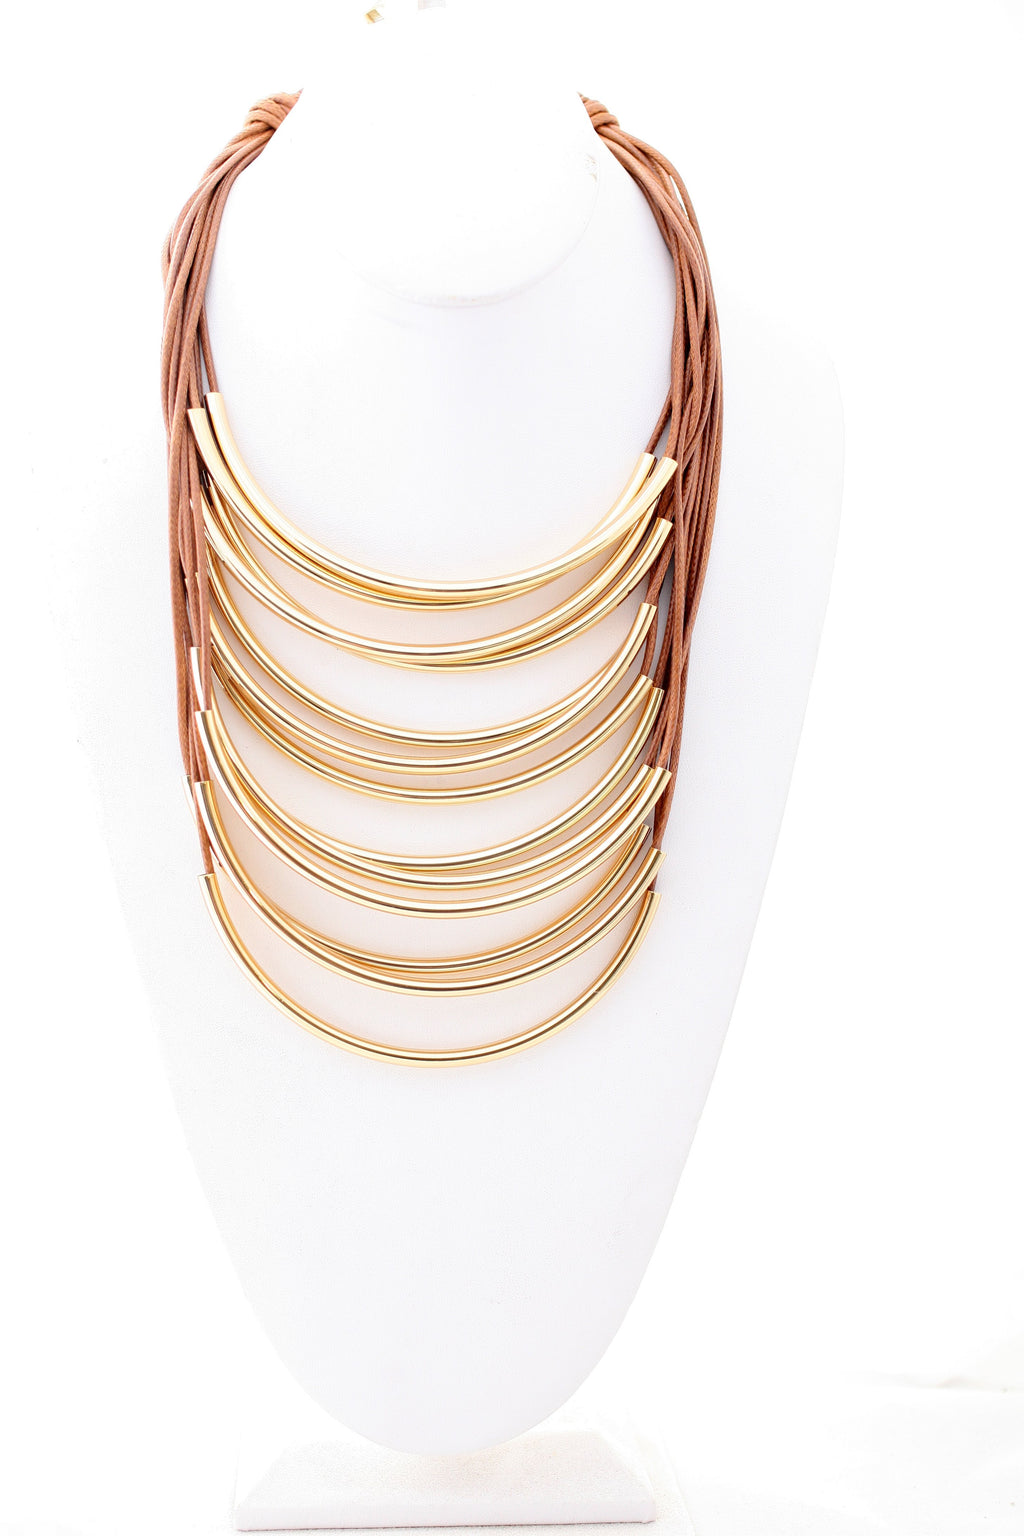 Multi strand leather cord and metal tubes draped statement necklace. 702N6214